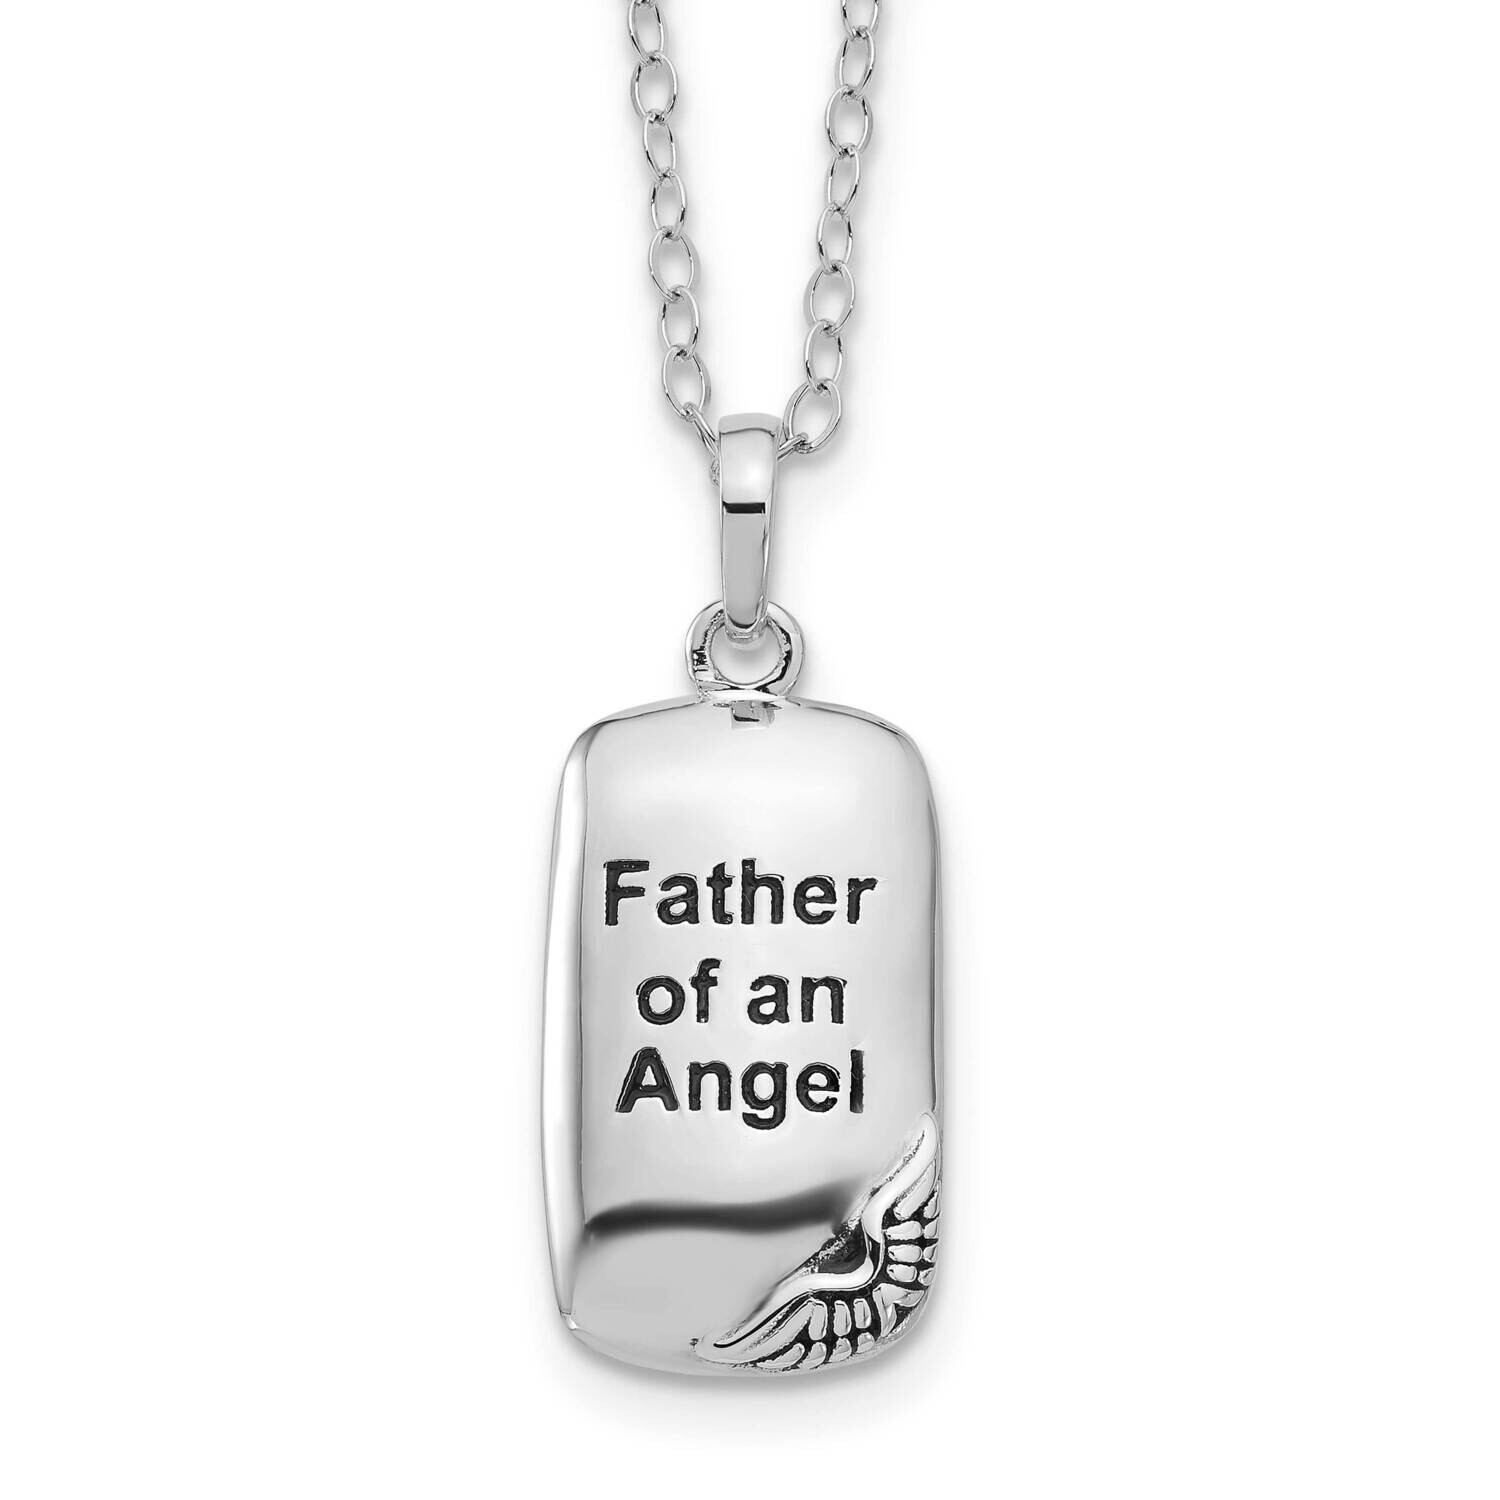 Sentimental Expressions Antiqued Father Of An Angel Ash Holder 18 Inch Necklace Sterling Silver Rhodium-Plated QSX770